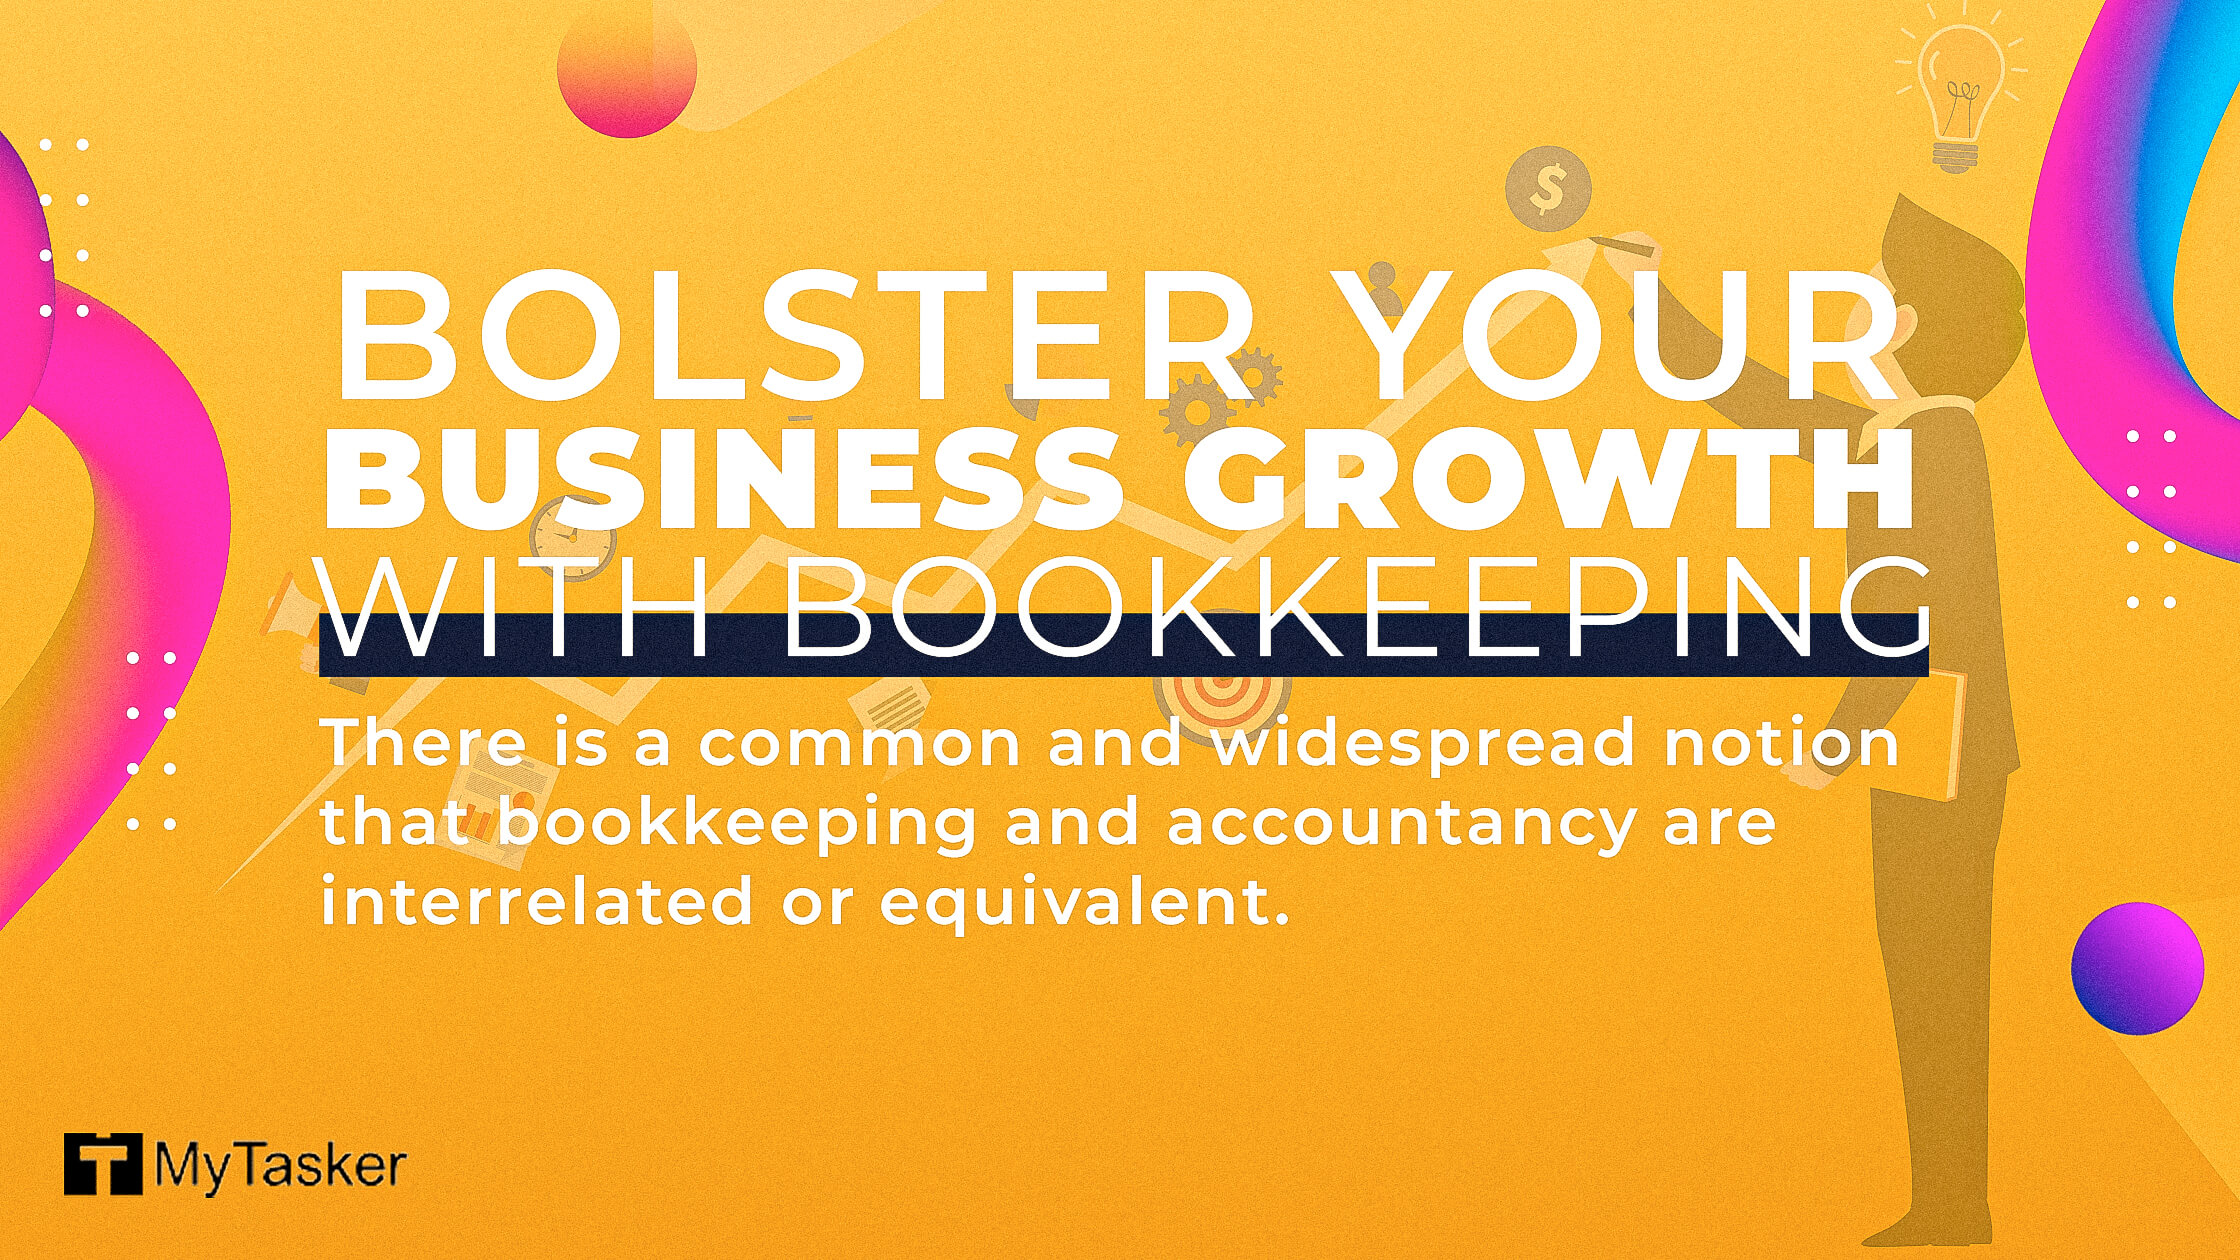 Bolster Your Business Growth With Bookkeeping